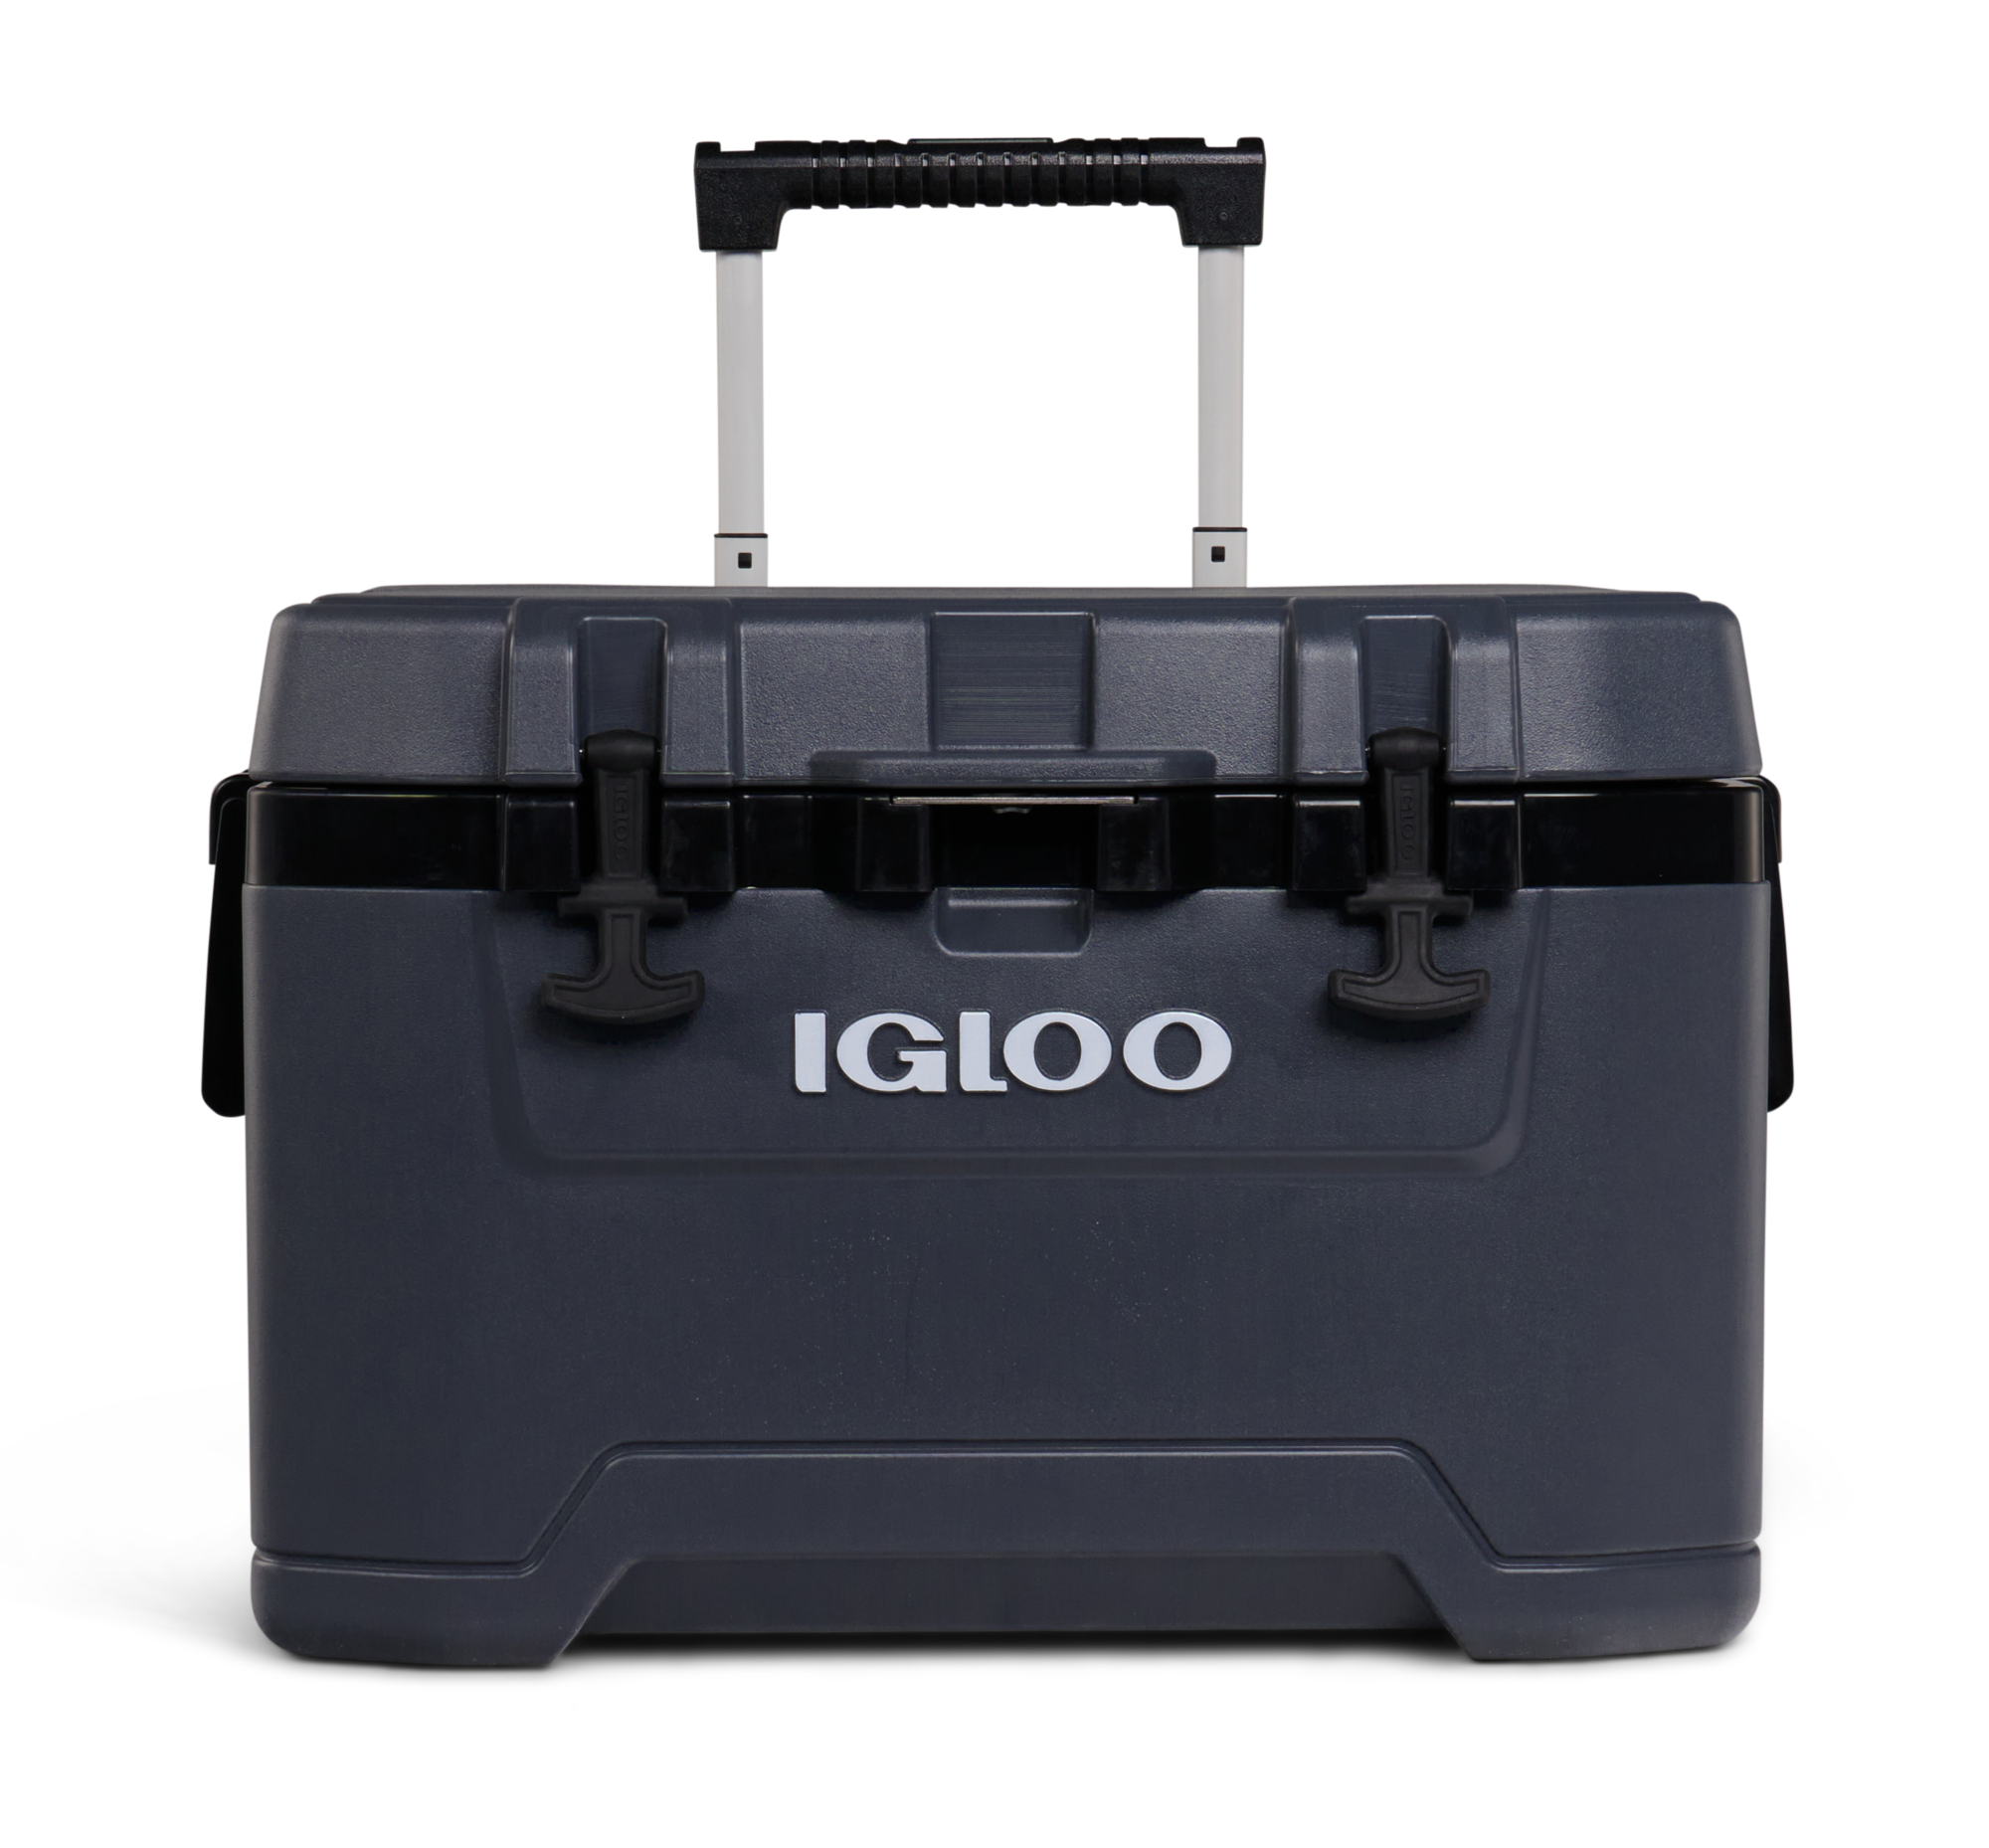 Igloo Overland 52 QT Ice Chest Cooler with Wheels, Gray (26" x 19" x 16") - image 1 of 17